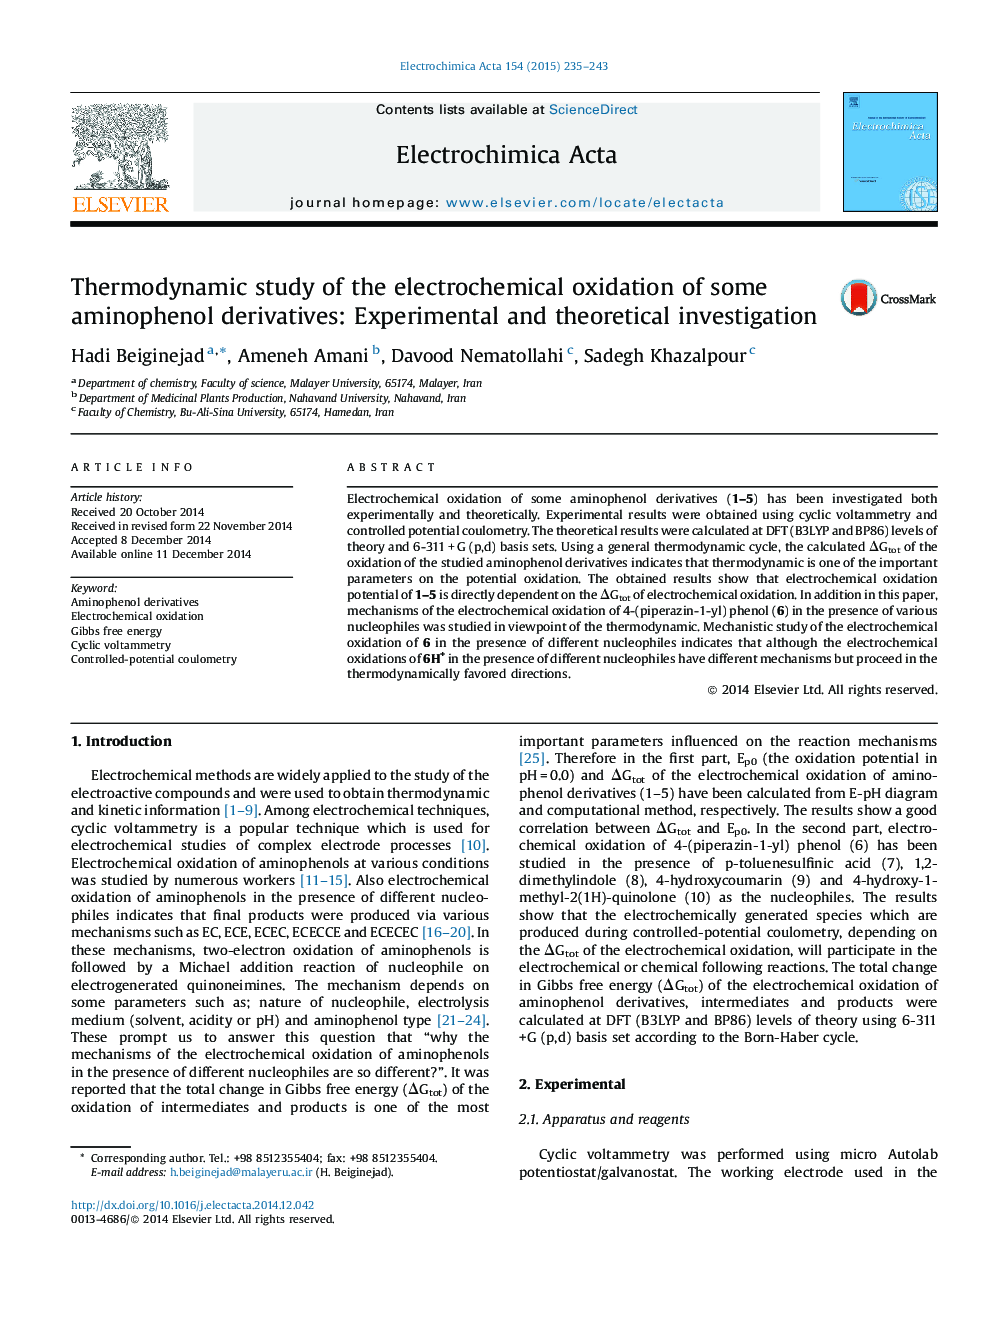 Thermodynamic study of the electrochemical oxidation of some aminophenol derivatives: Experimental and theoretical investigation